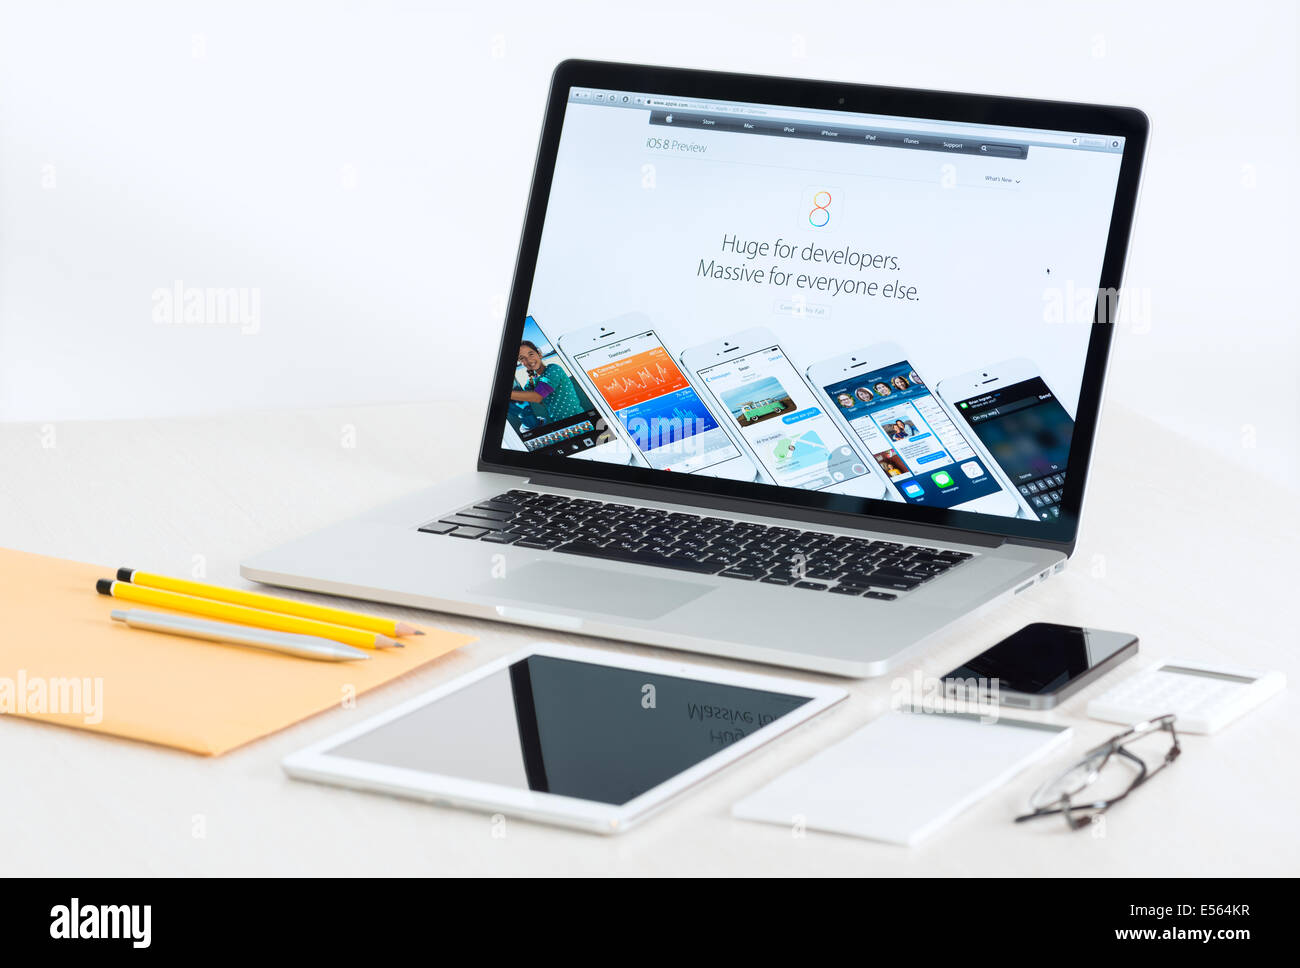 Studio shot of brand new Apple MacBook Pro with Apple mobile devices presenting iOS 8 for developers Stock Photo